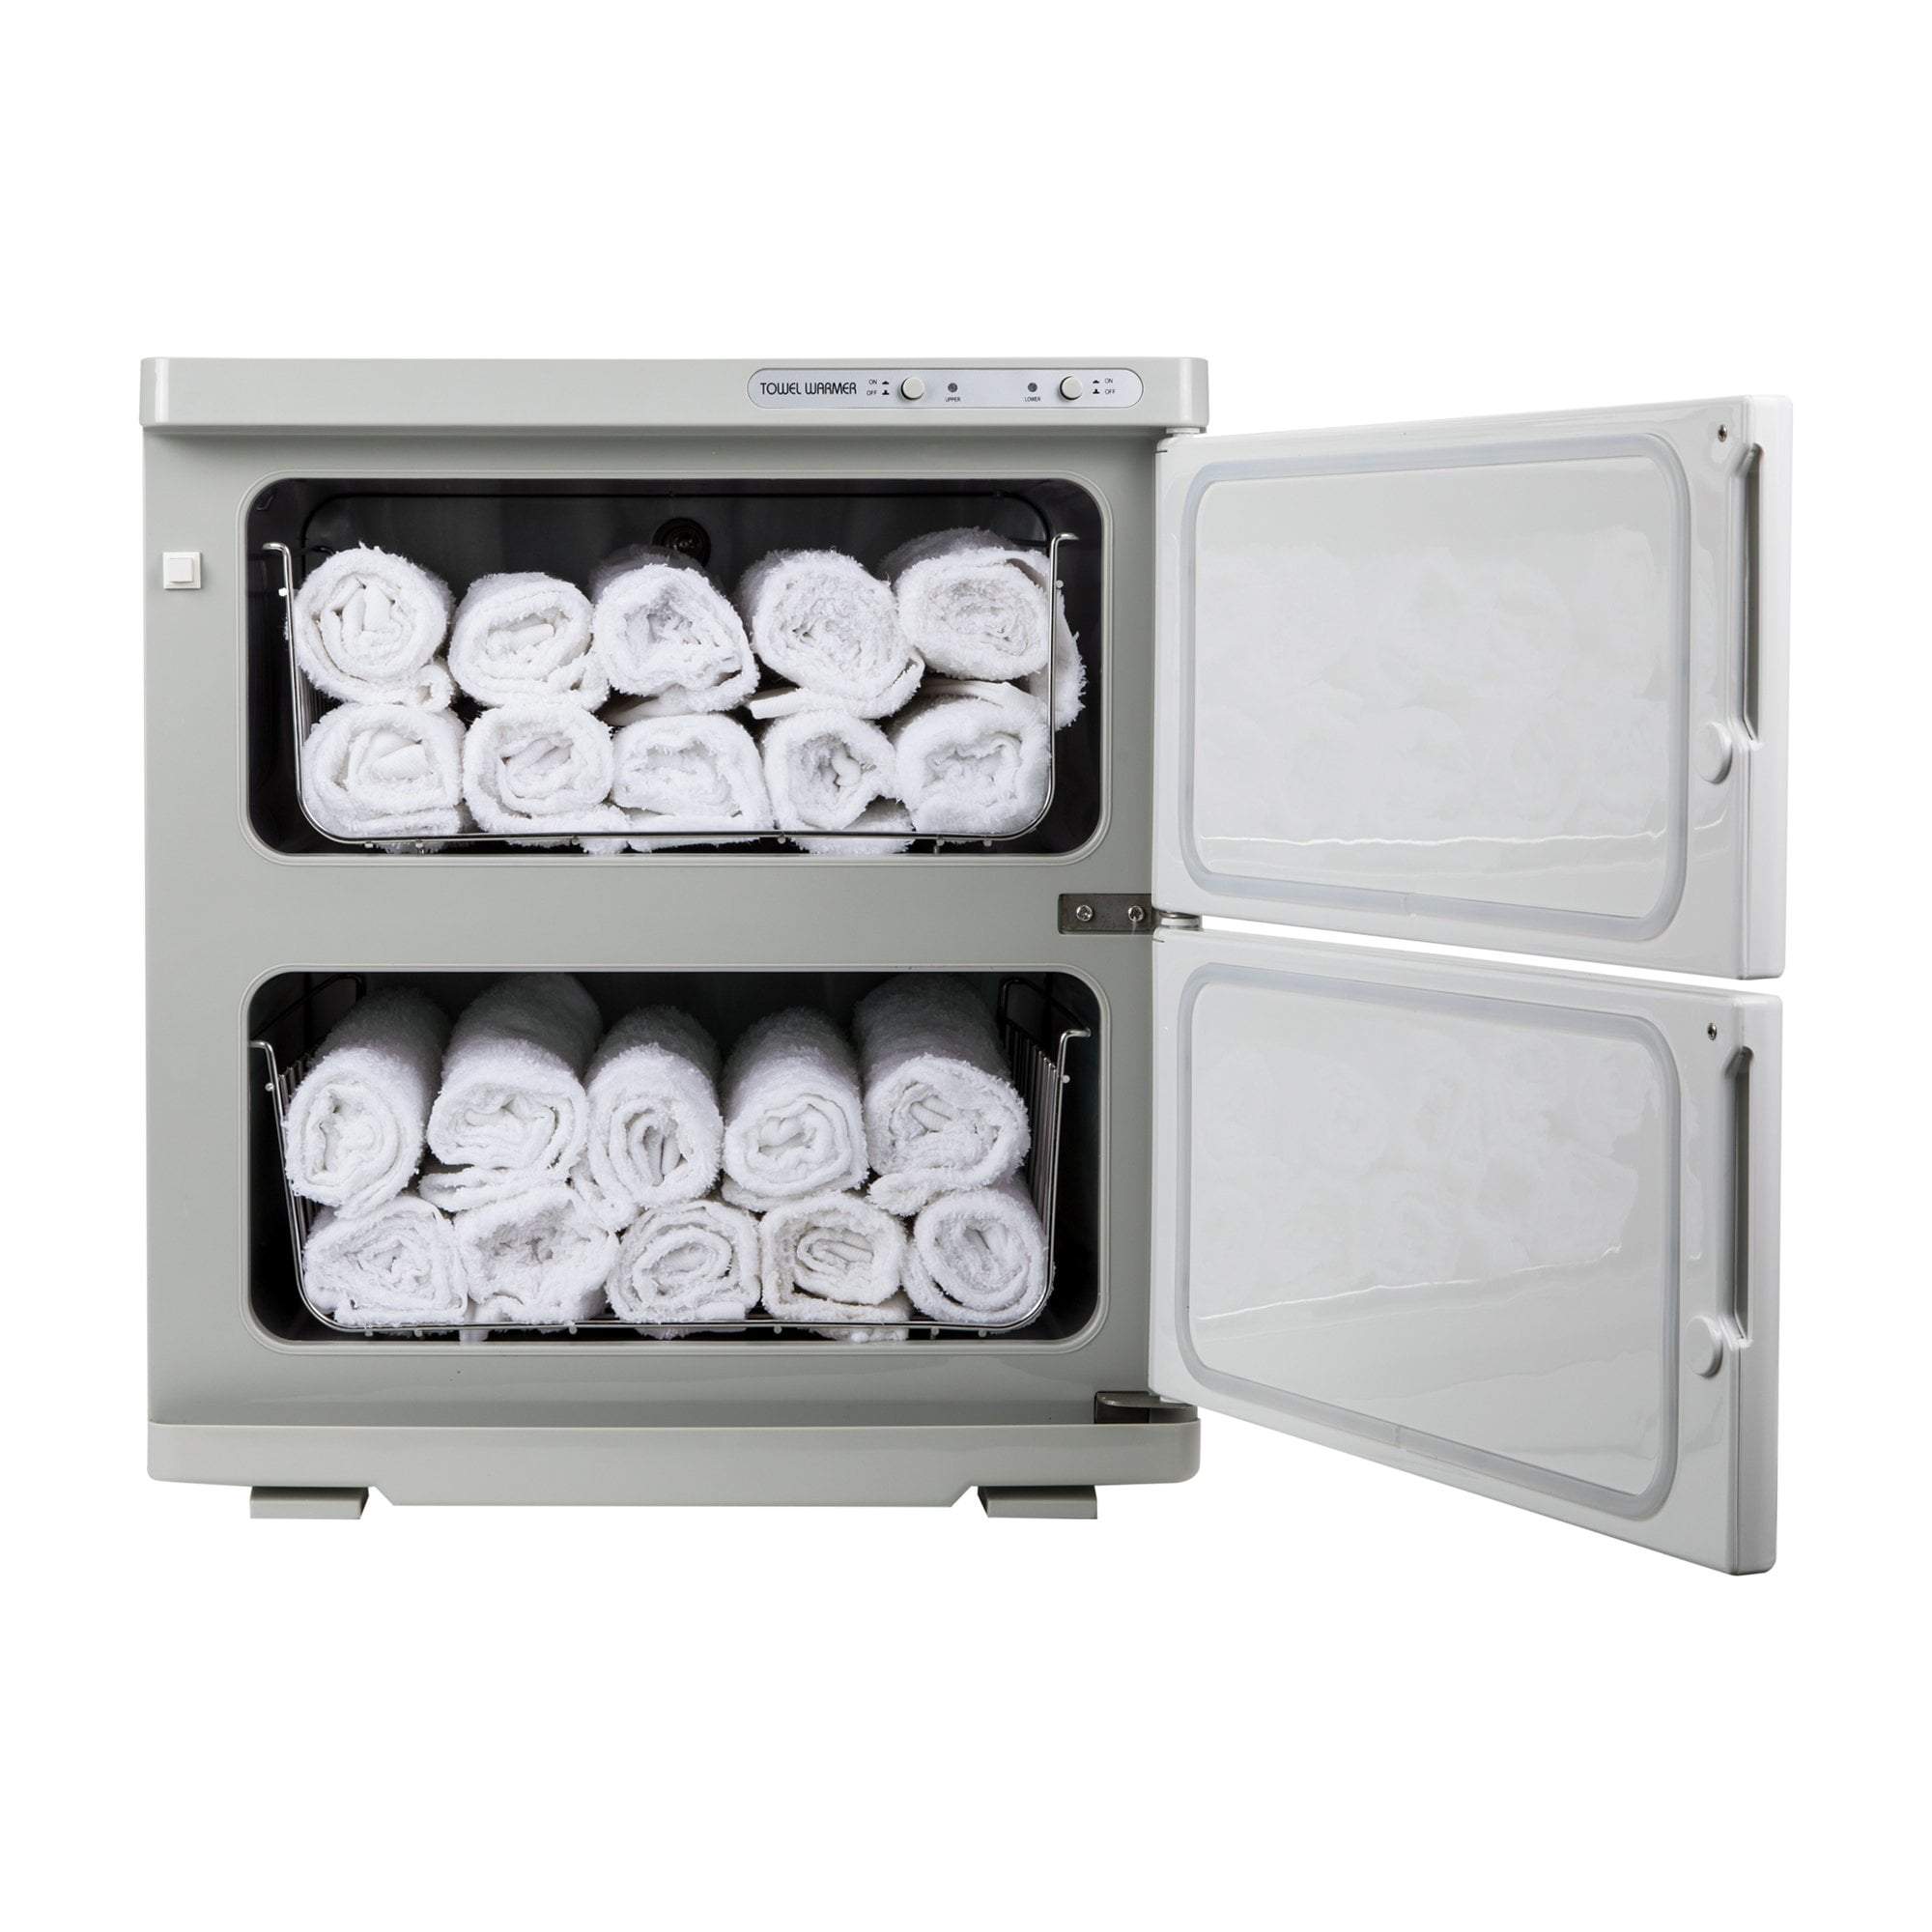 Treatment Warmers & Towel Cabi SpaEquip Towel Cabinet, Double, White